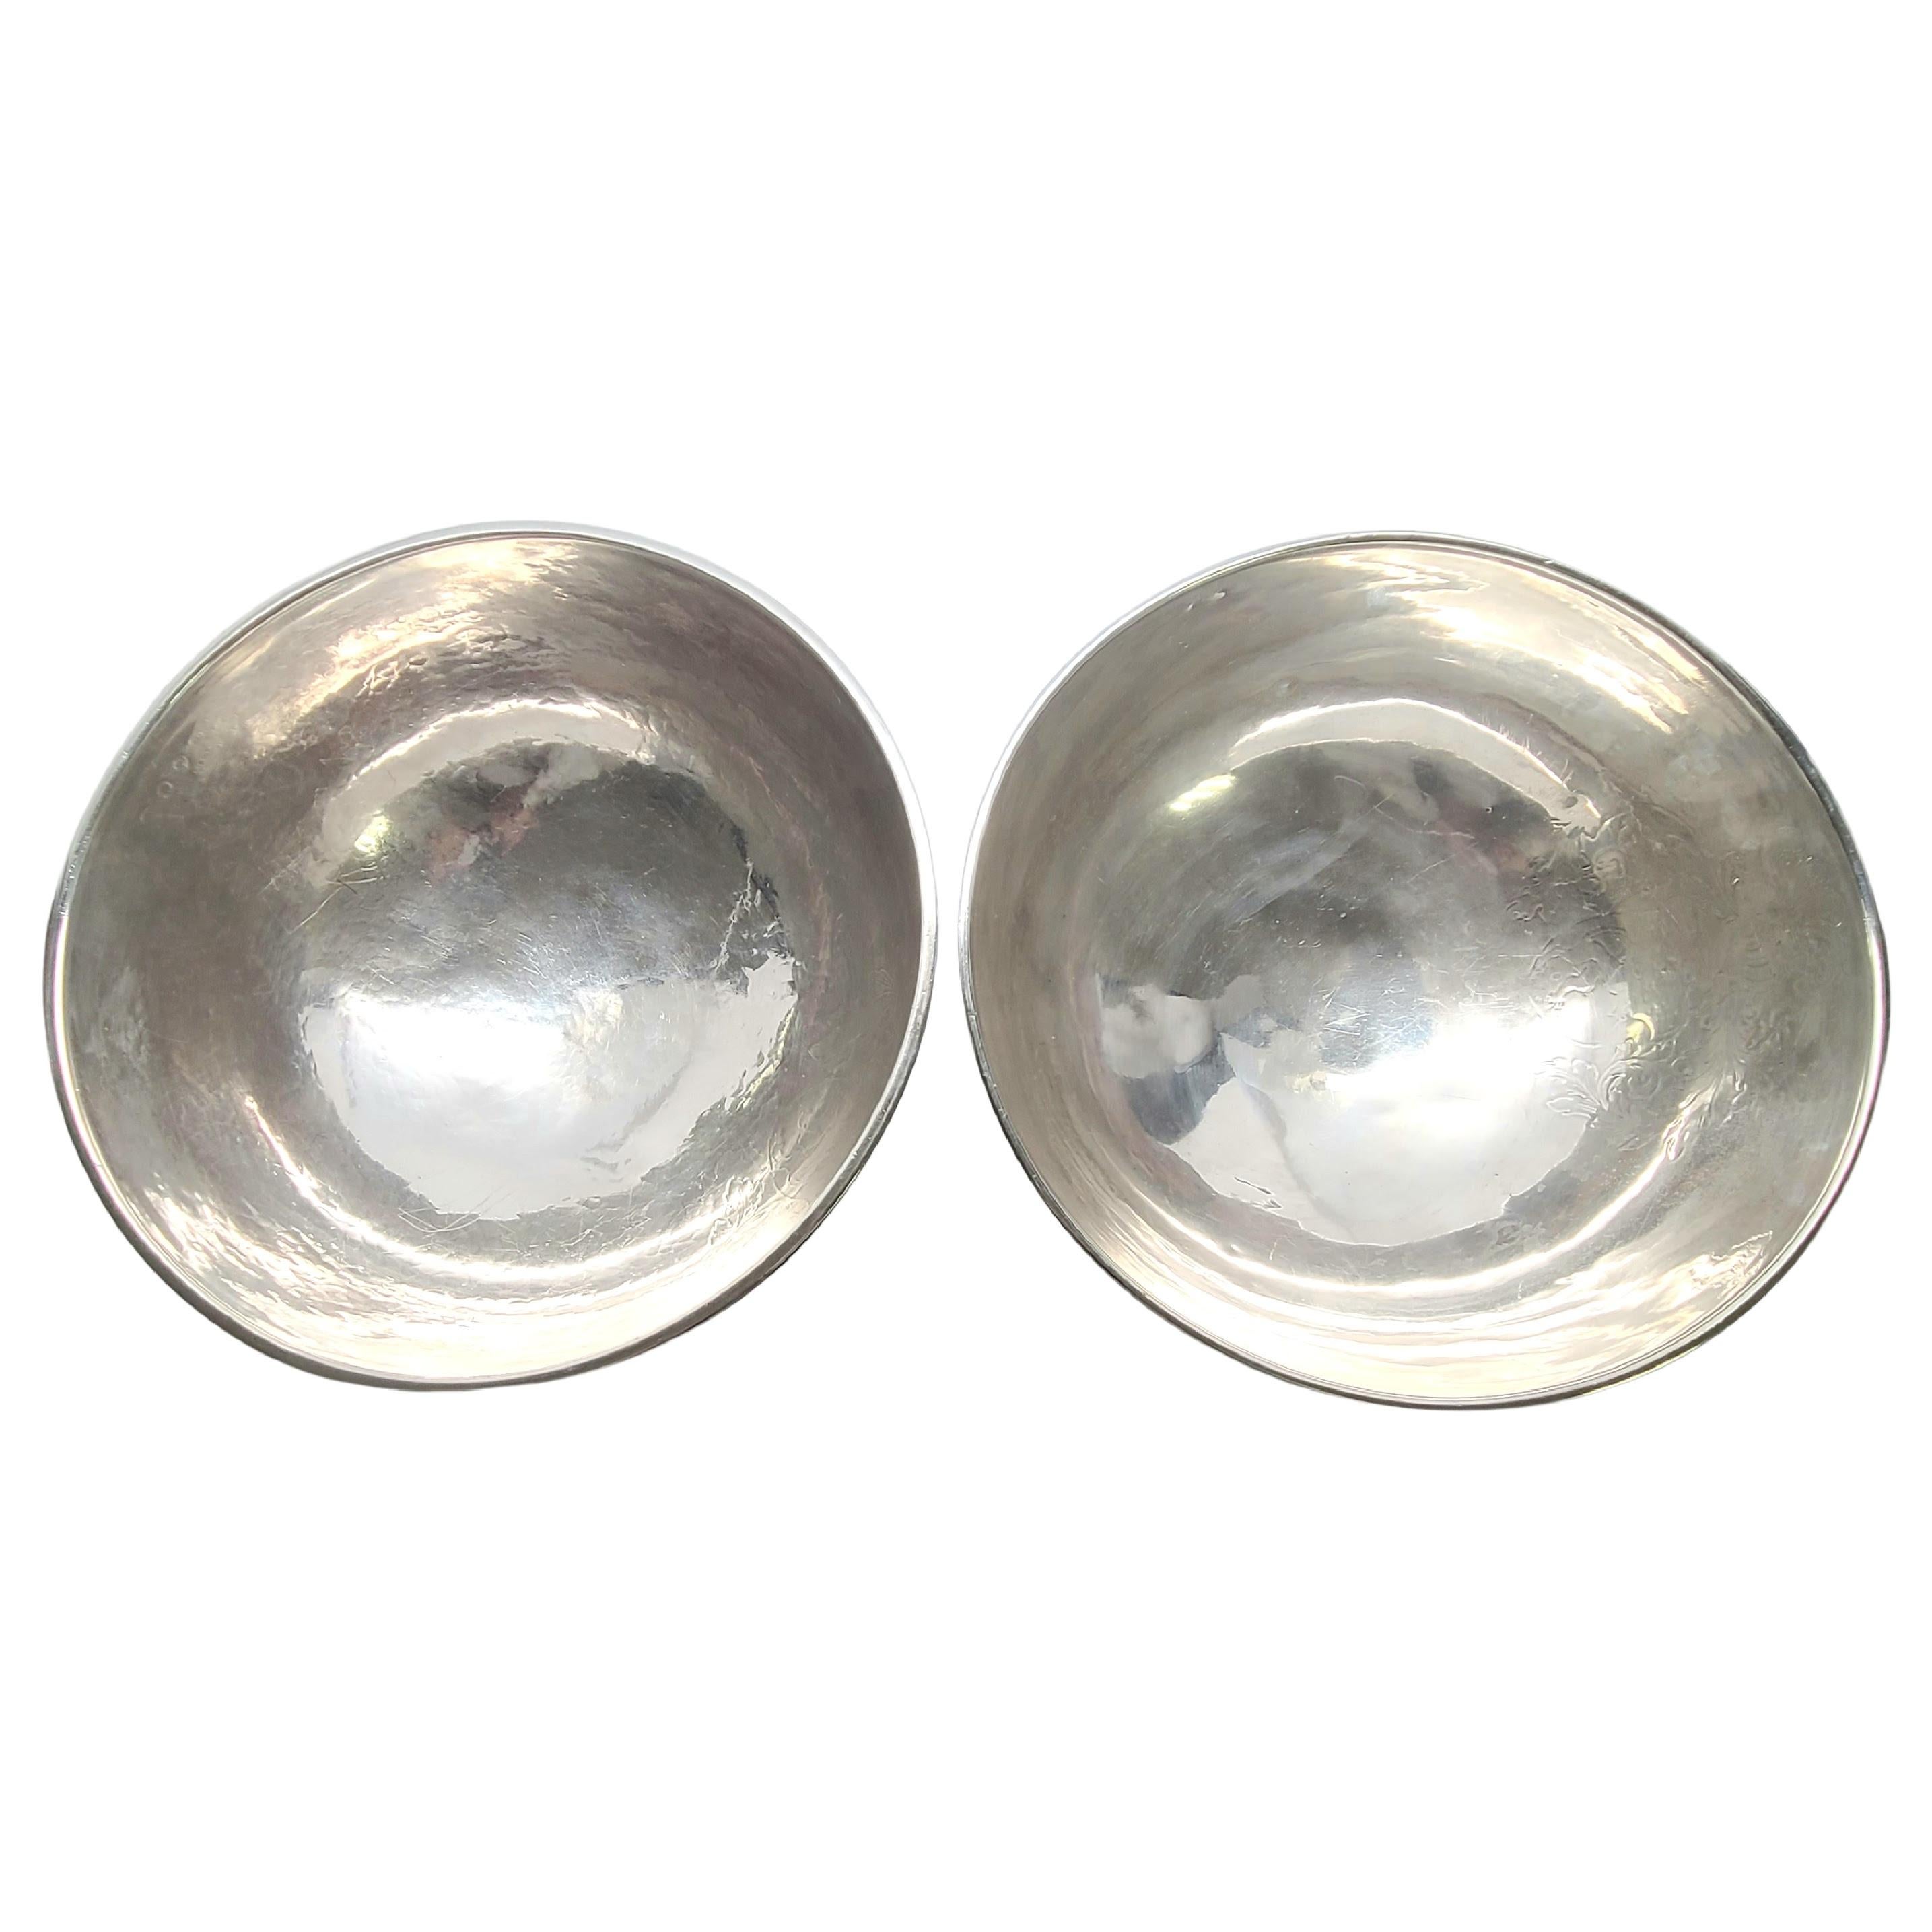 Set of 2 Large Antique Hanau Sterling Silver Bowls British Import Muller In Good Condition For Sale In Washington Depot, CT